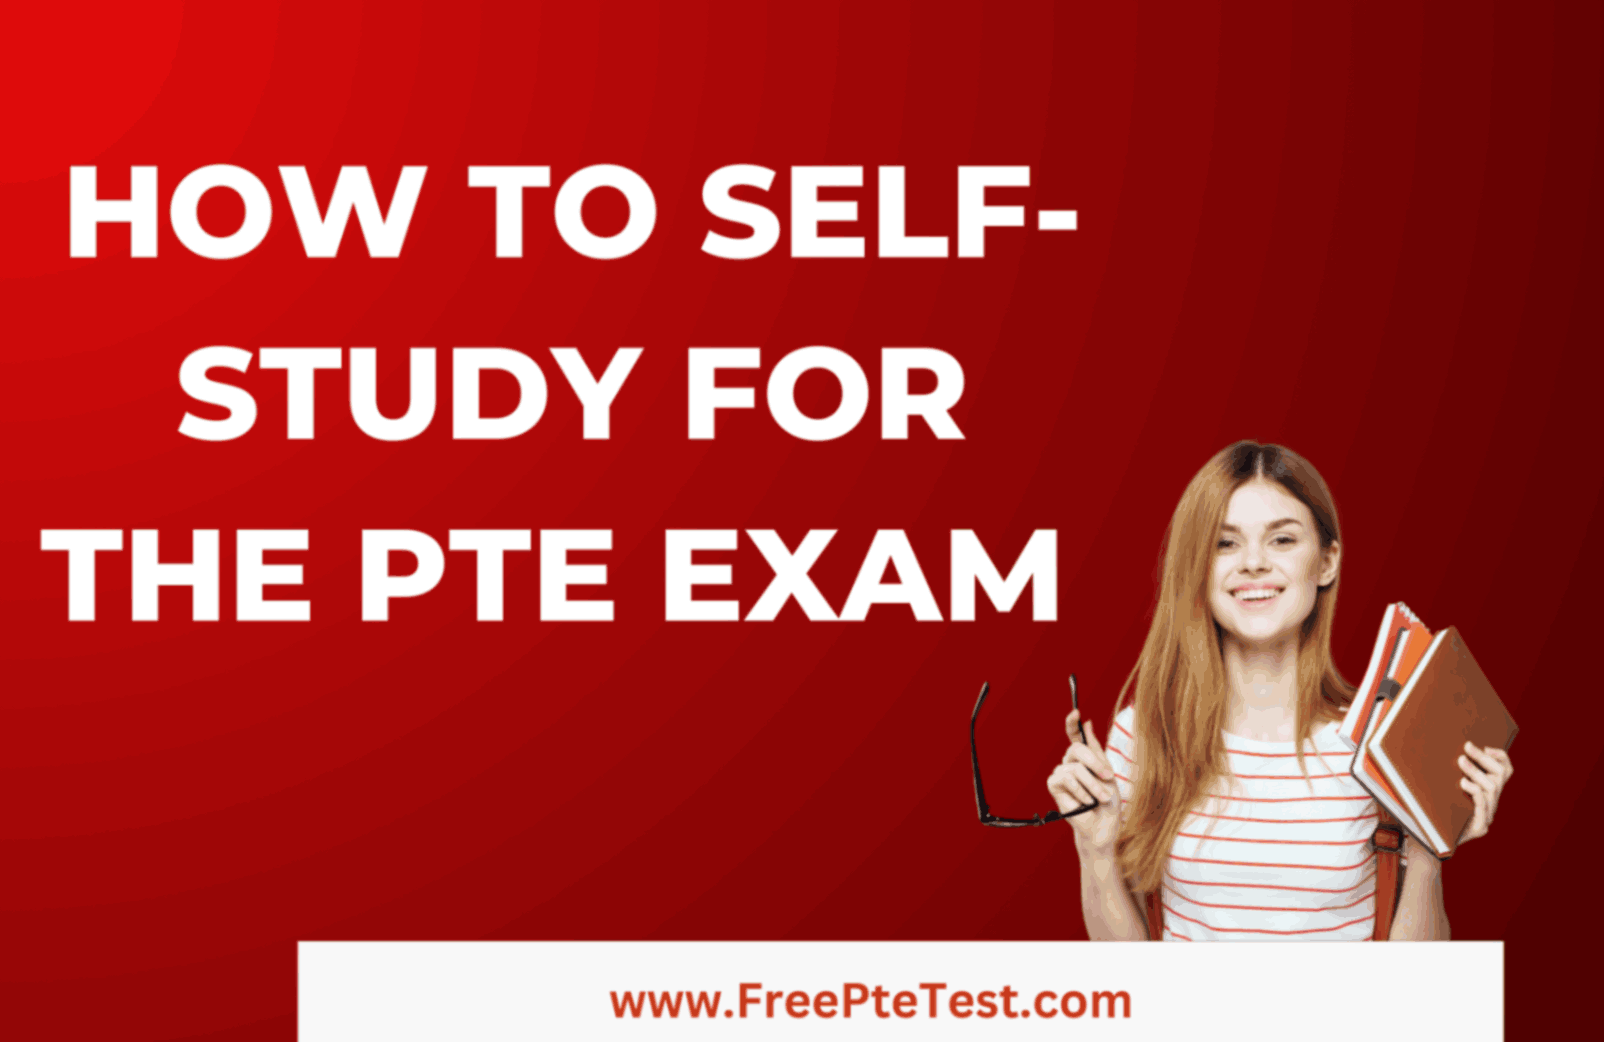 You are currently viewing How to Self-Study for the PTE Exam